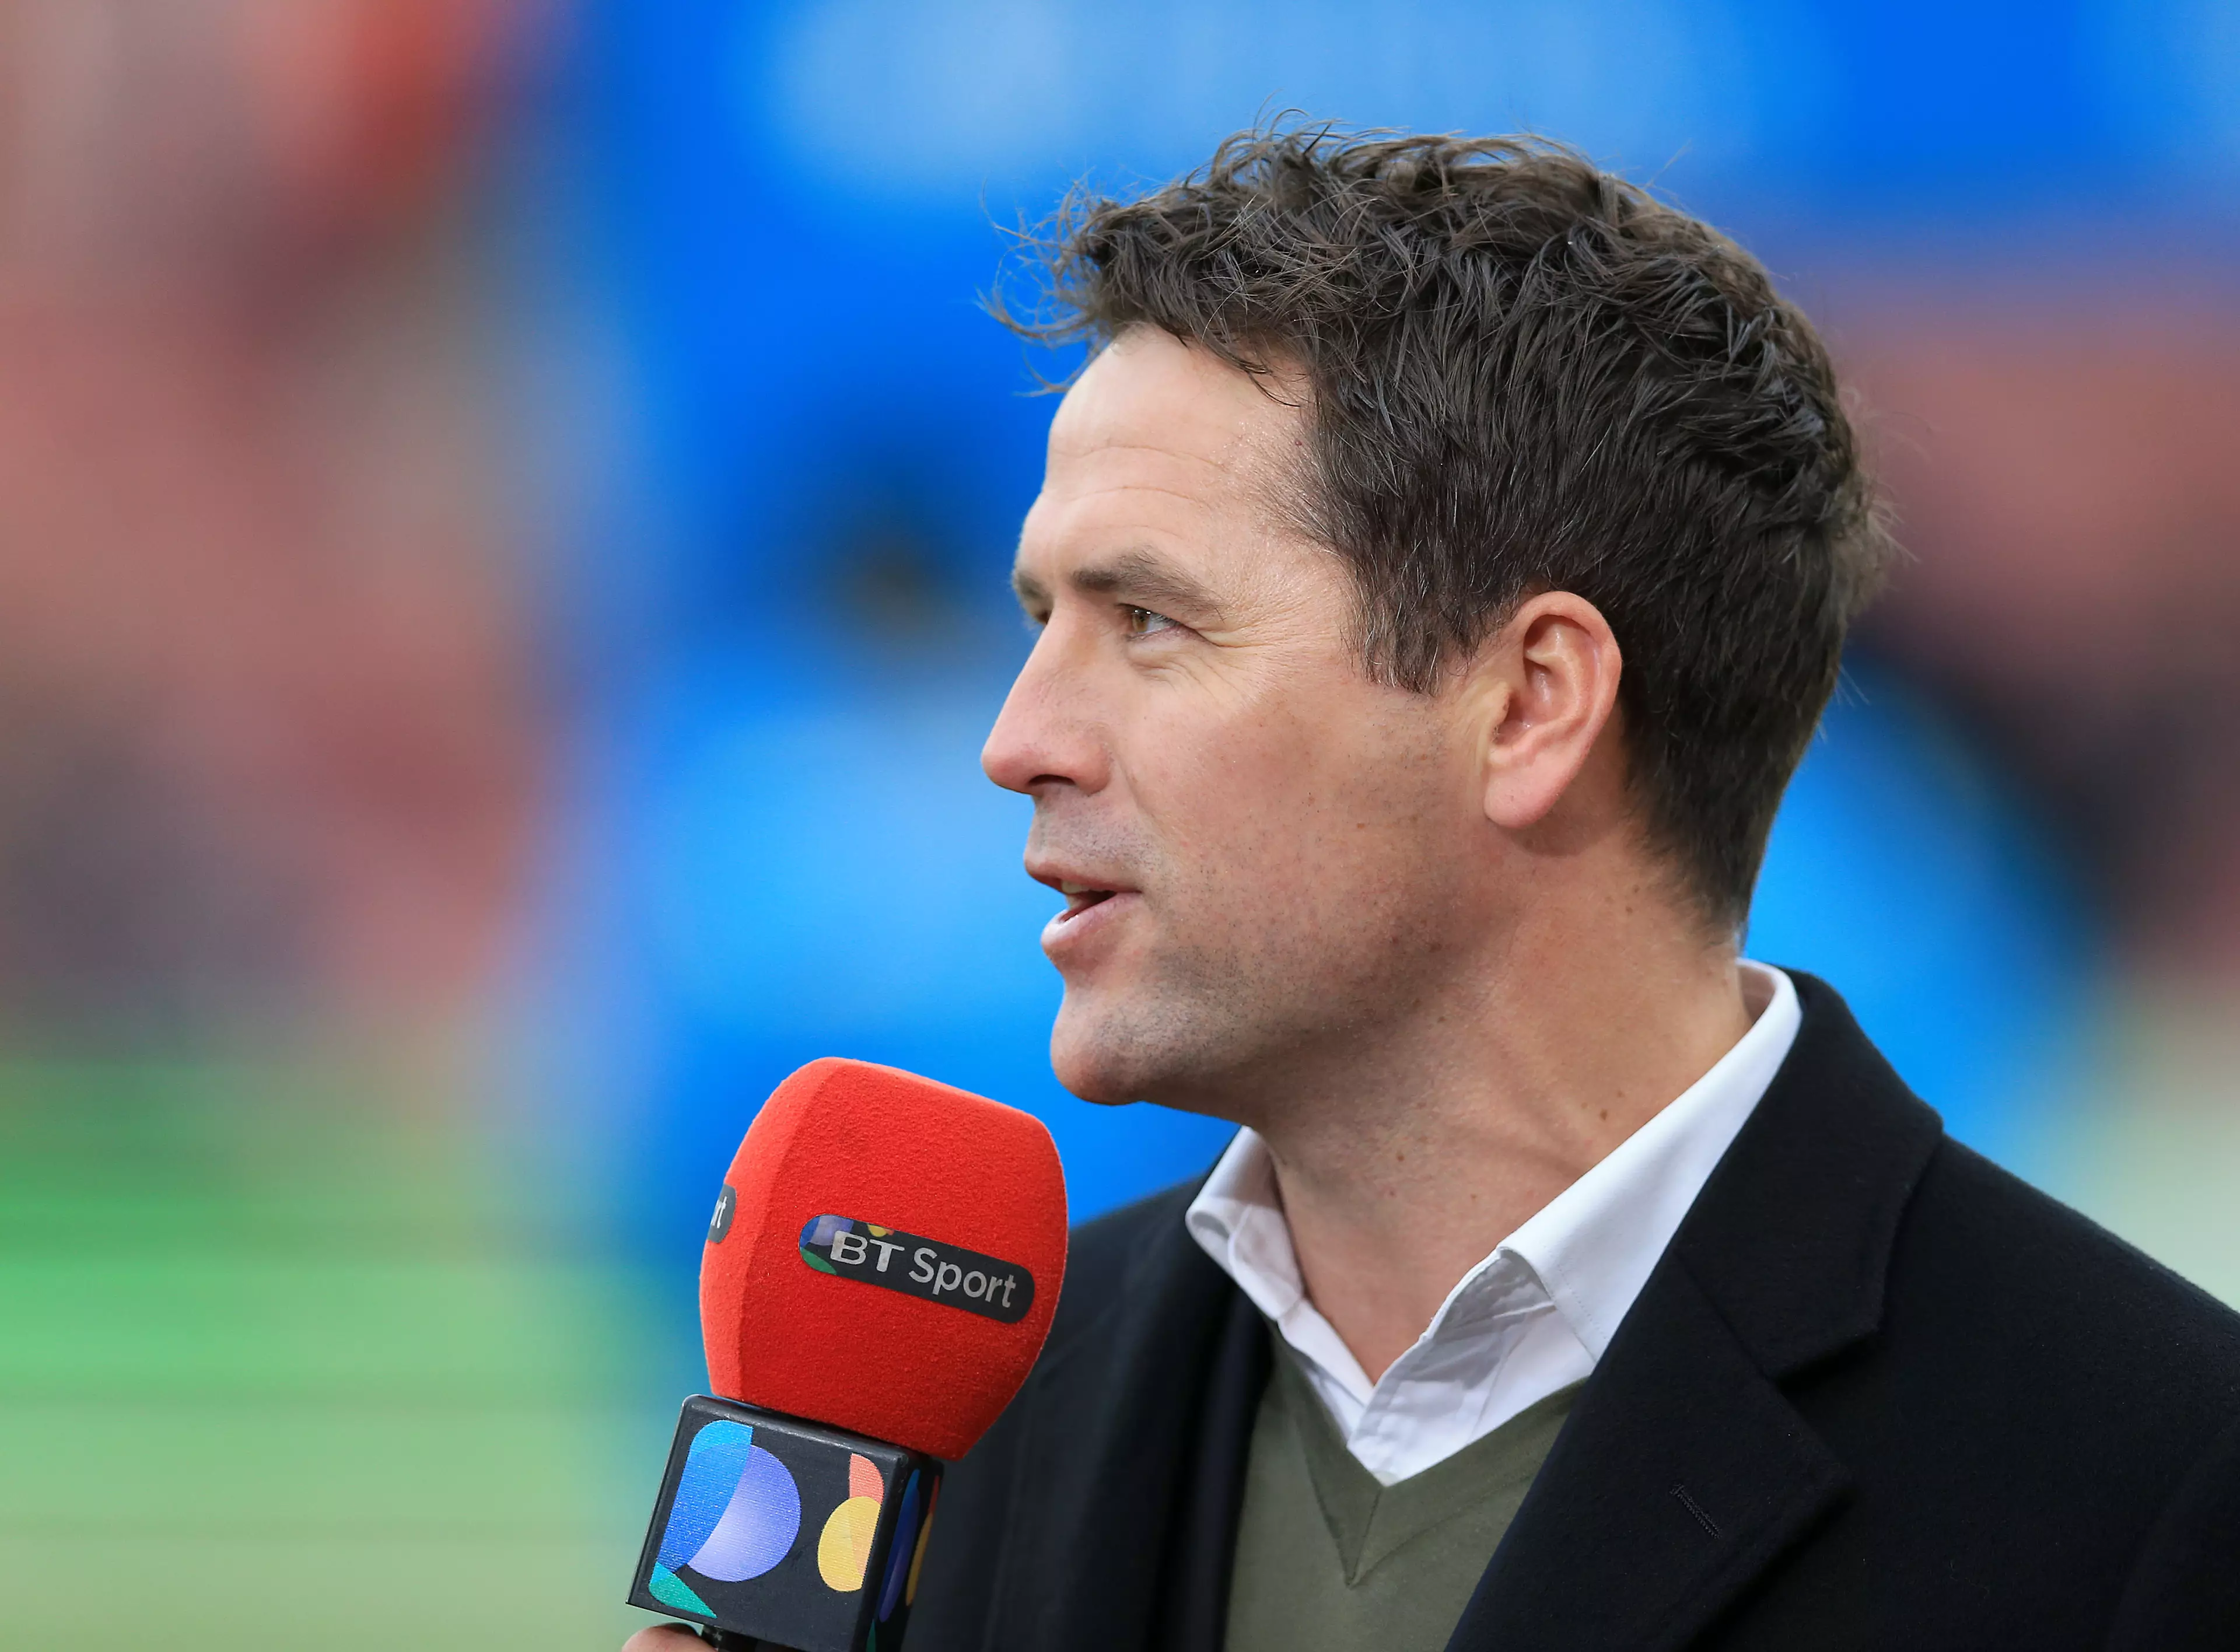 Michael Owen's Latest Comments Have Again Baffled Everyone 